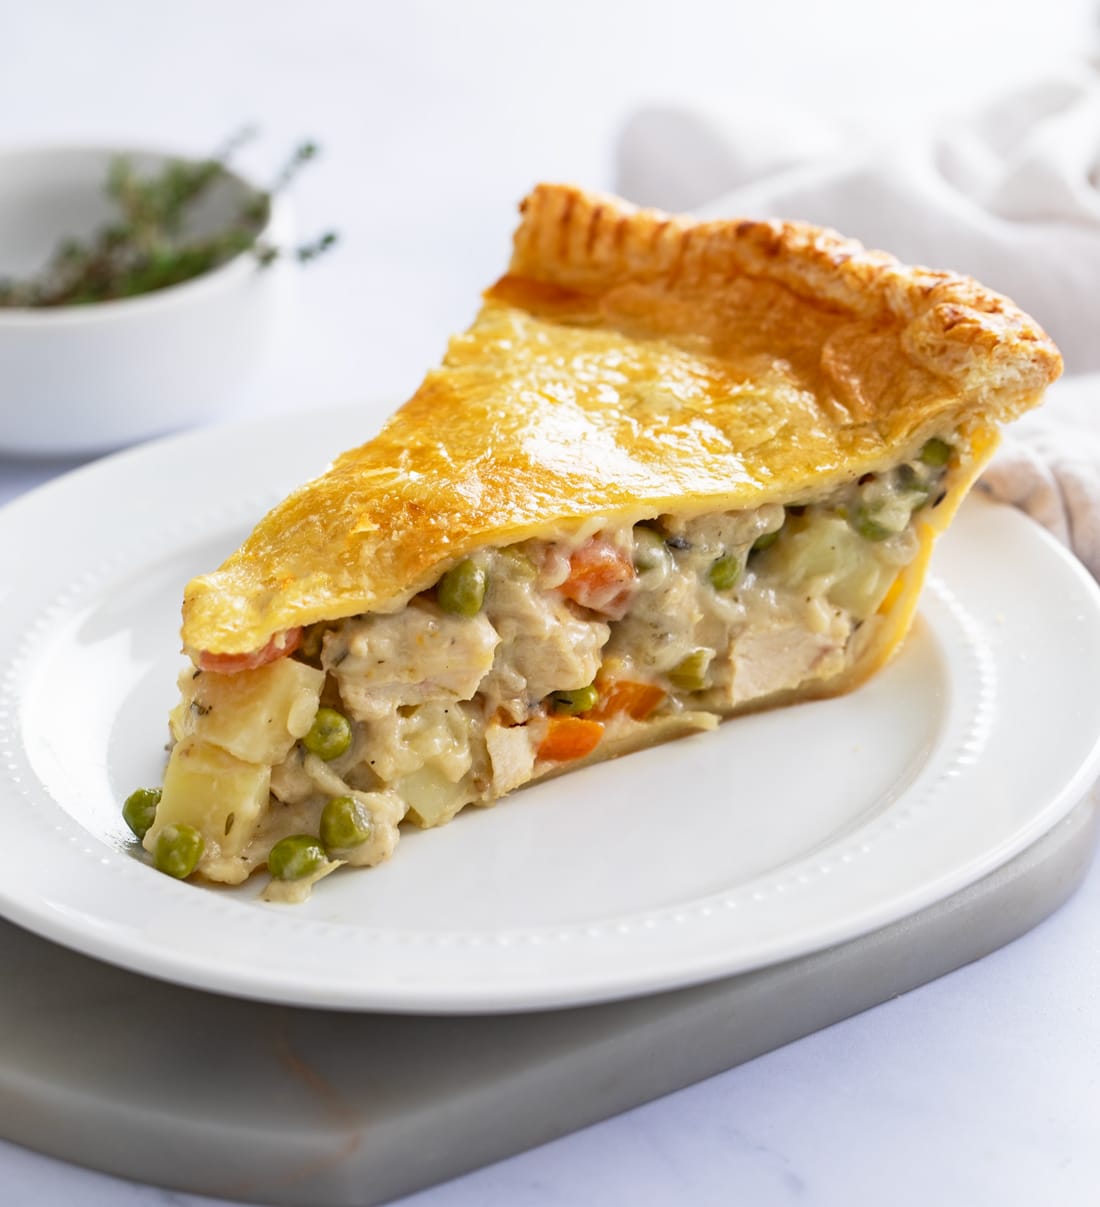 A slice of Chicken Pot Pie with a flaky puff pastry crust and thick filling on a white plate.